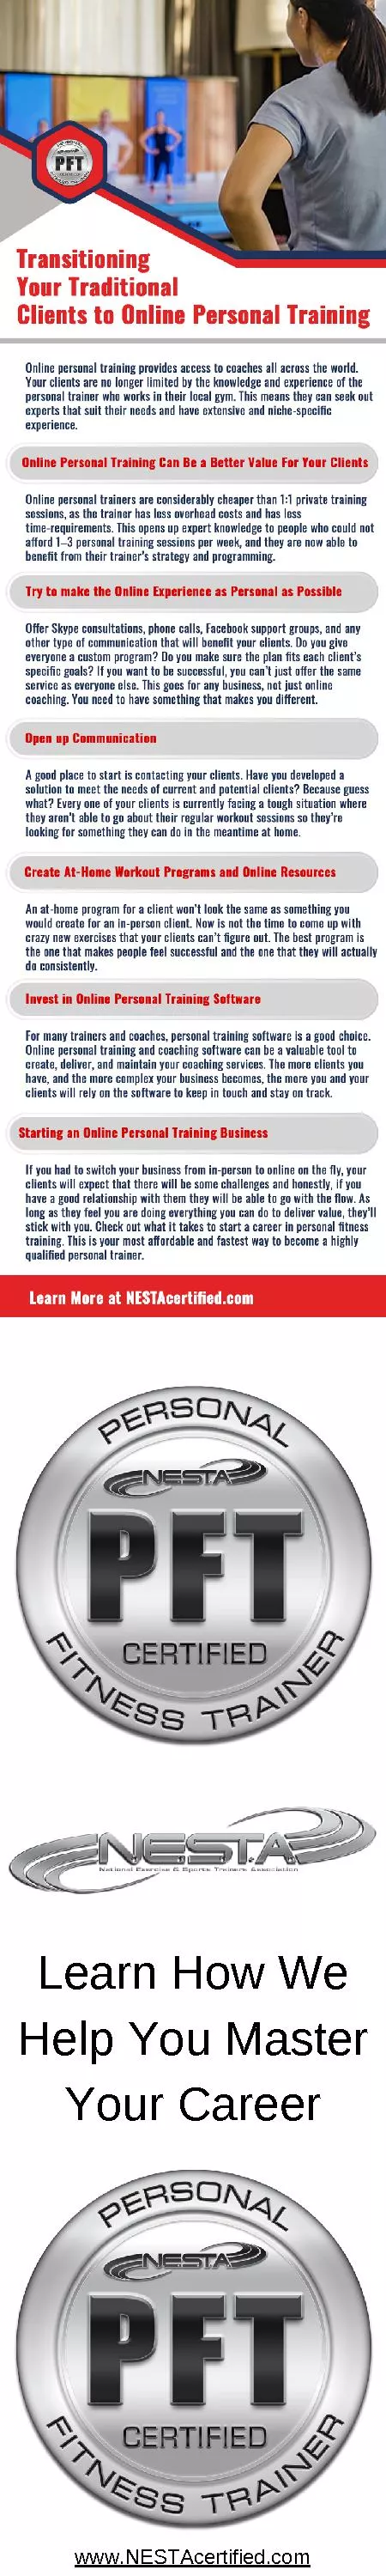 Online Personal Trainer Business Plan